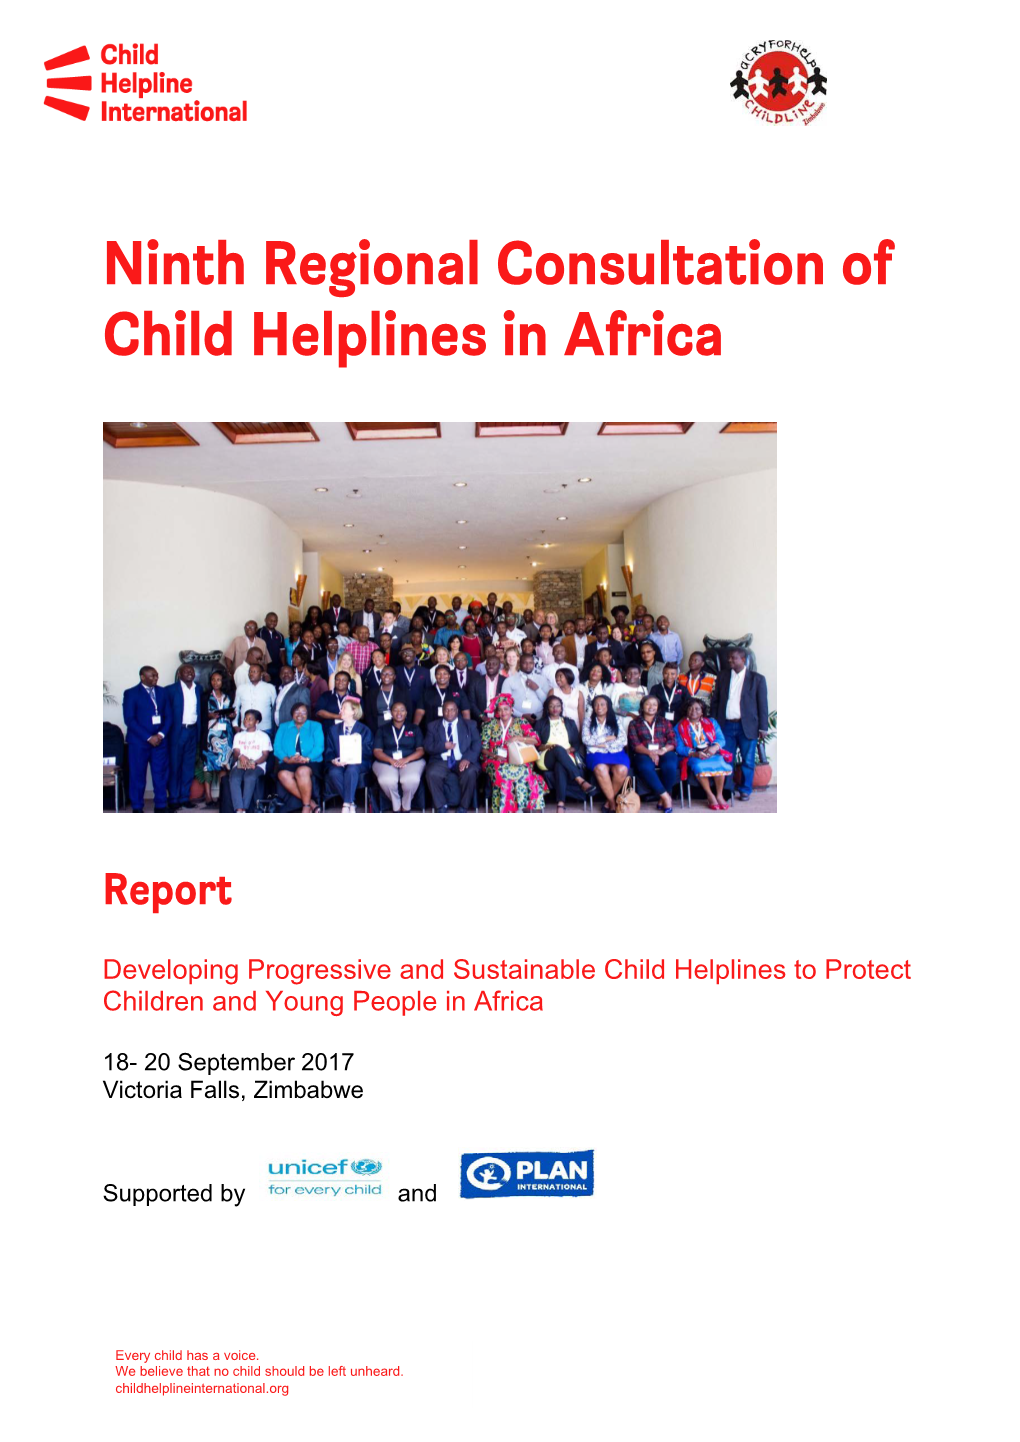 Ninth Regional Consultation of Child Helplines in Africa